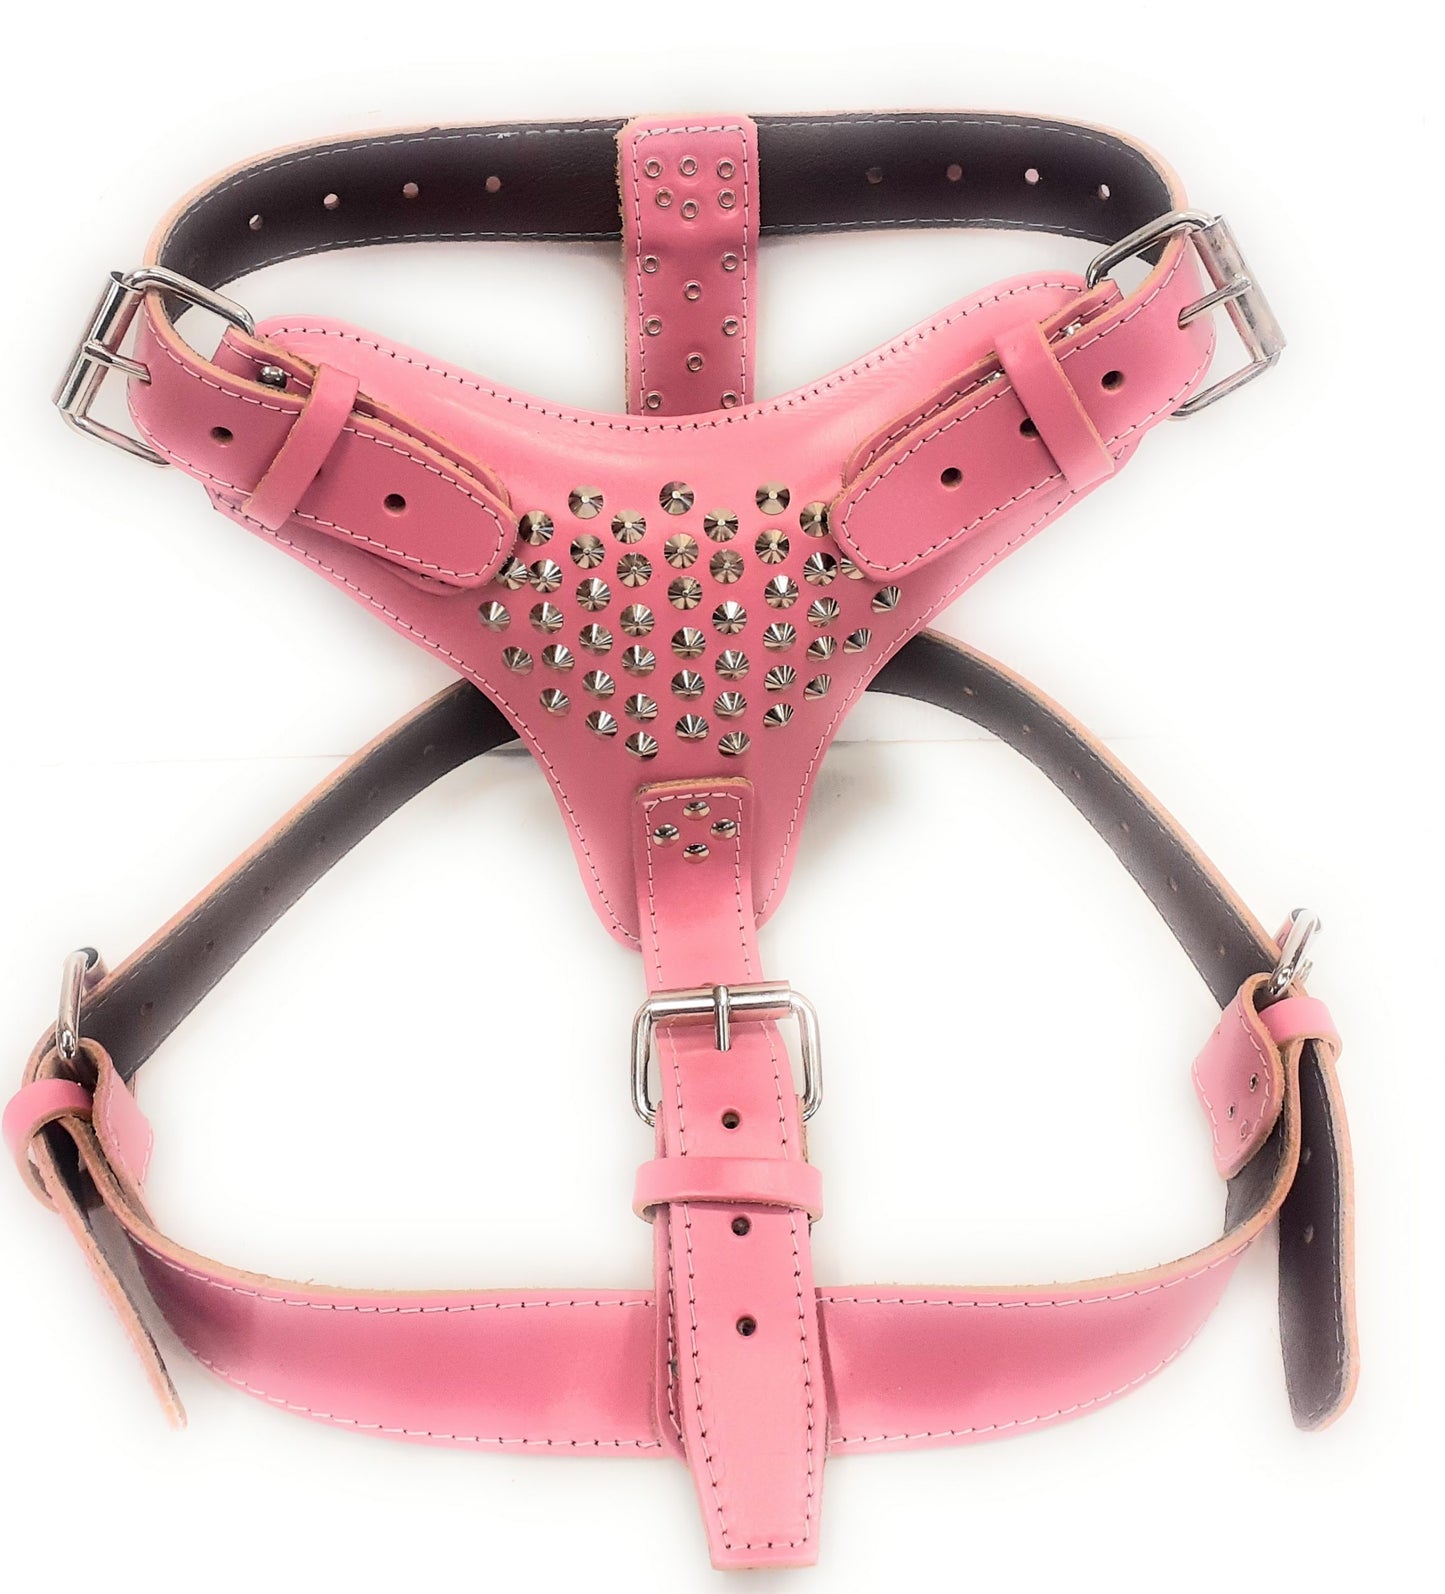 Extra Large Heavy Duty Deep Pink Leather Dog Harness with Studds